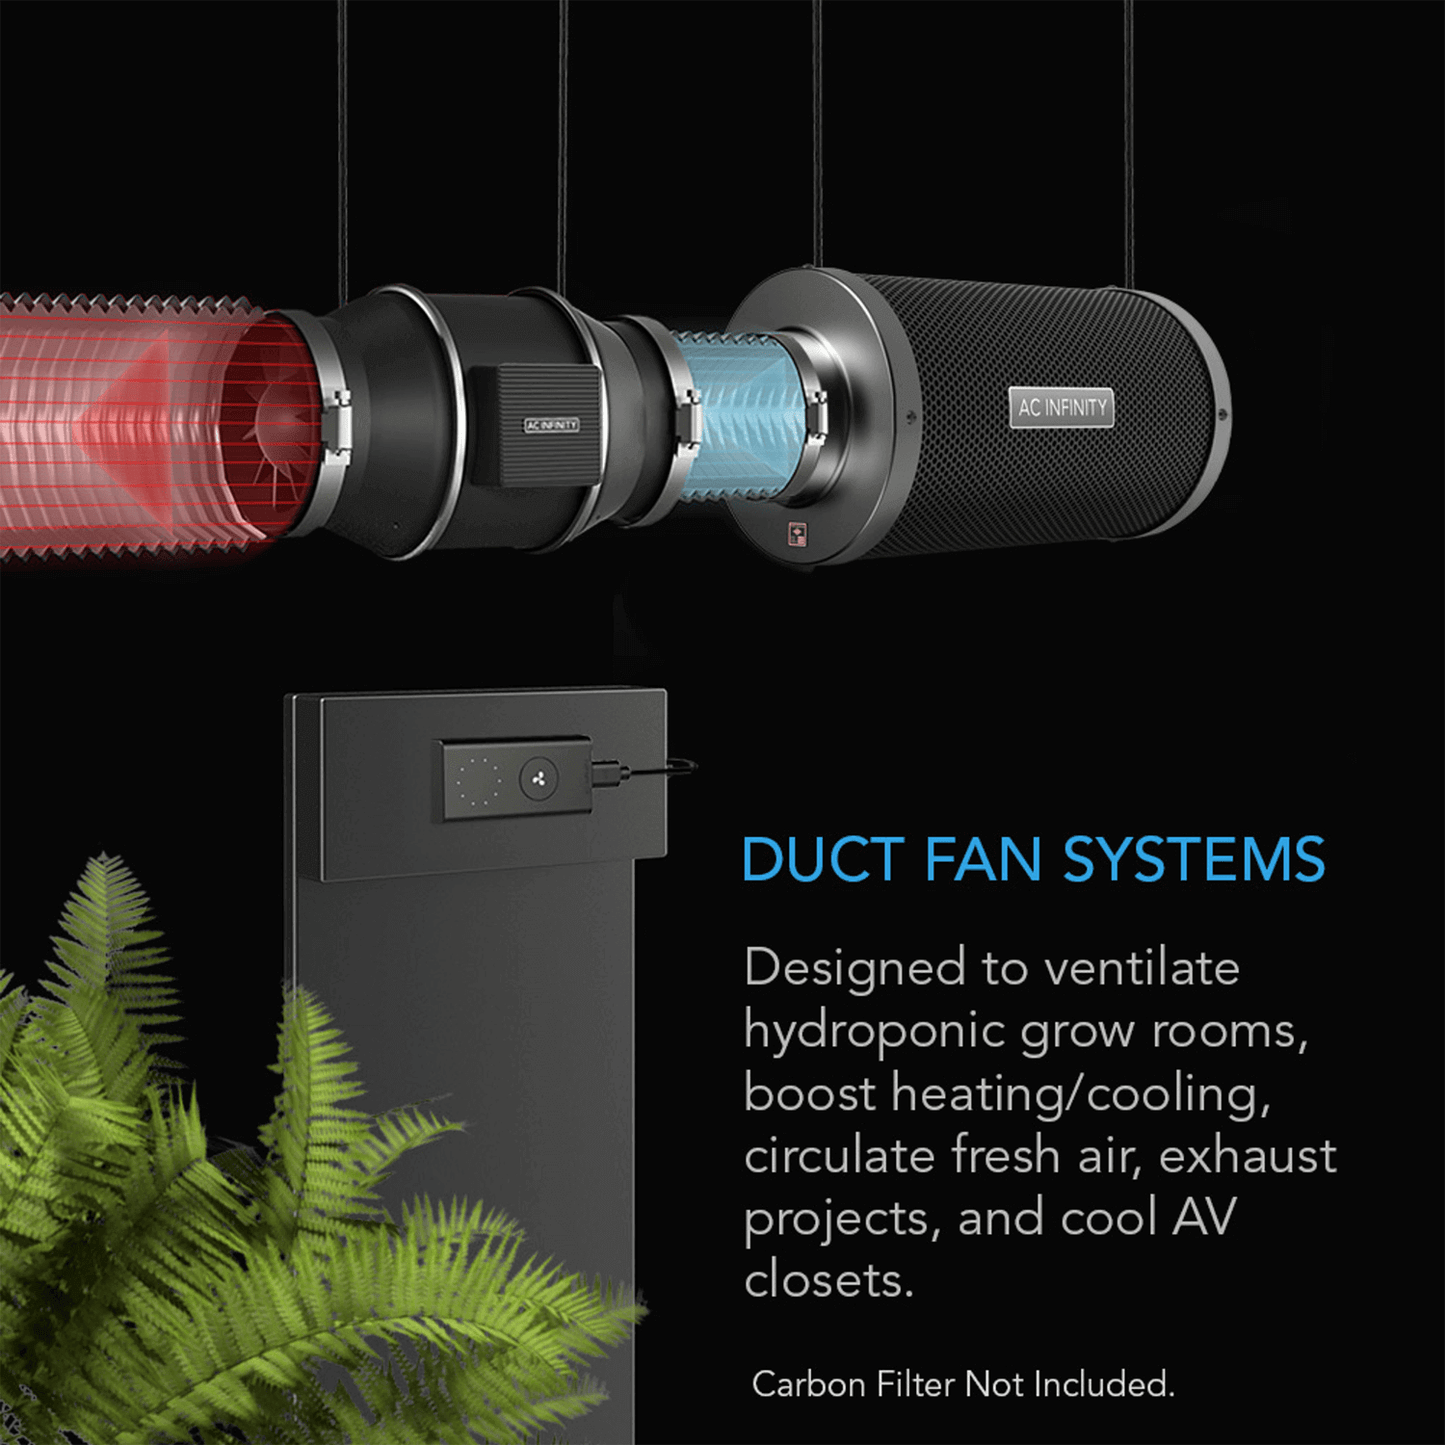 AC Infinity CLOUDLINE S6, Quiet Inline Duct Fan System with Speed Controller, 6-Inch | AI-CLS6 | Grow Tents Depot | Climate Control | 819137020306